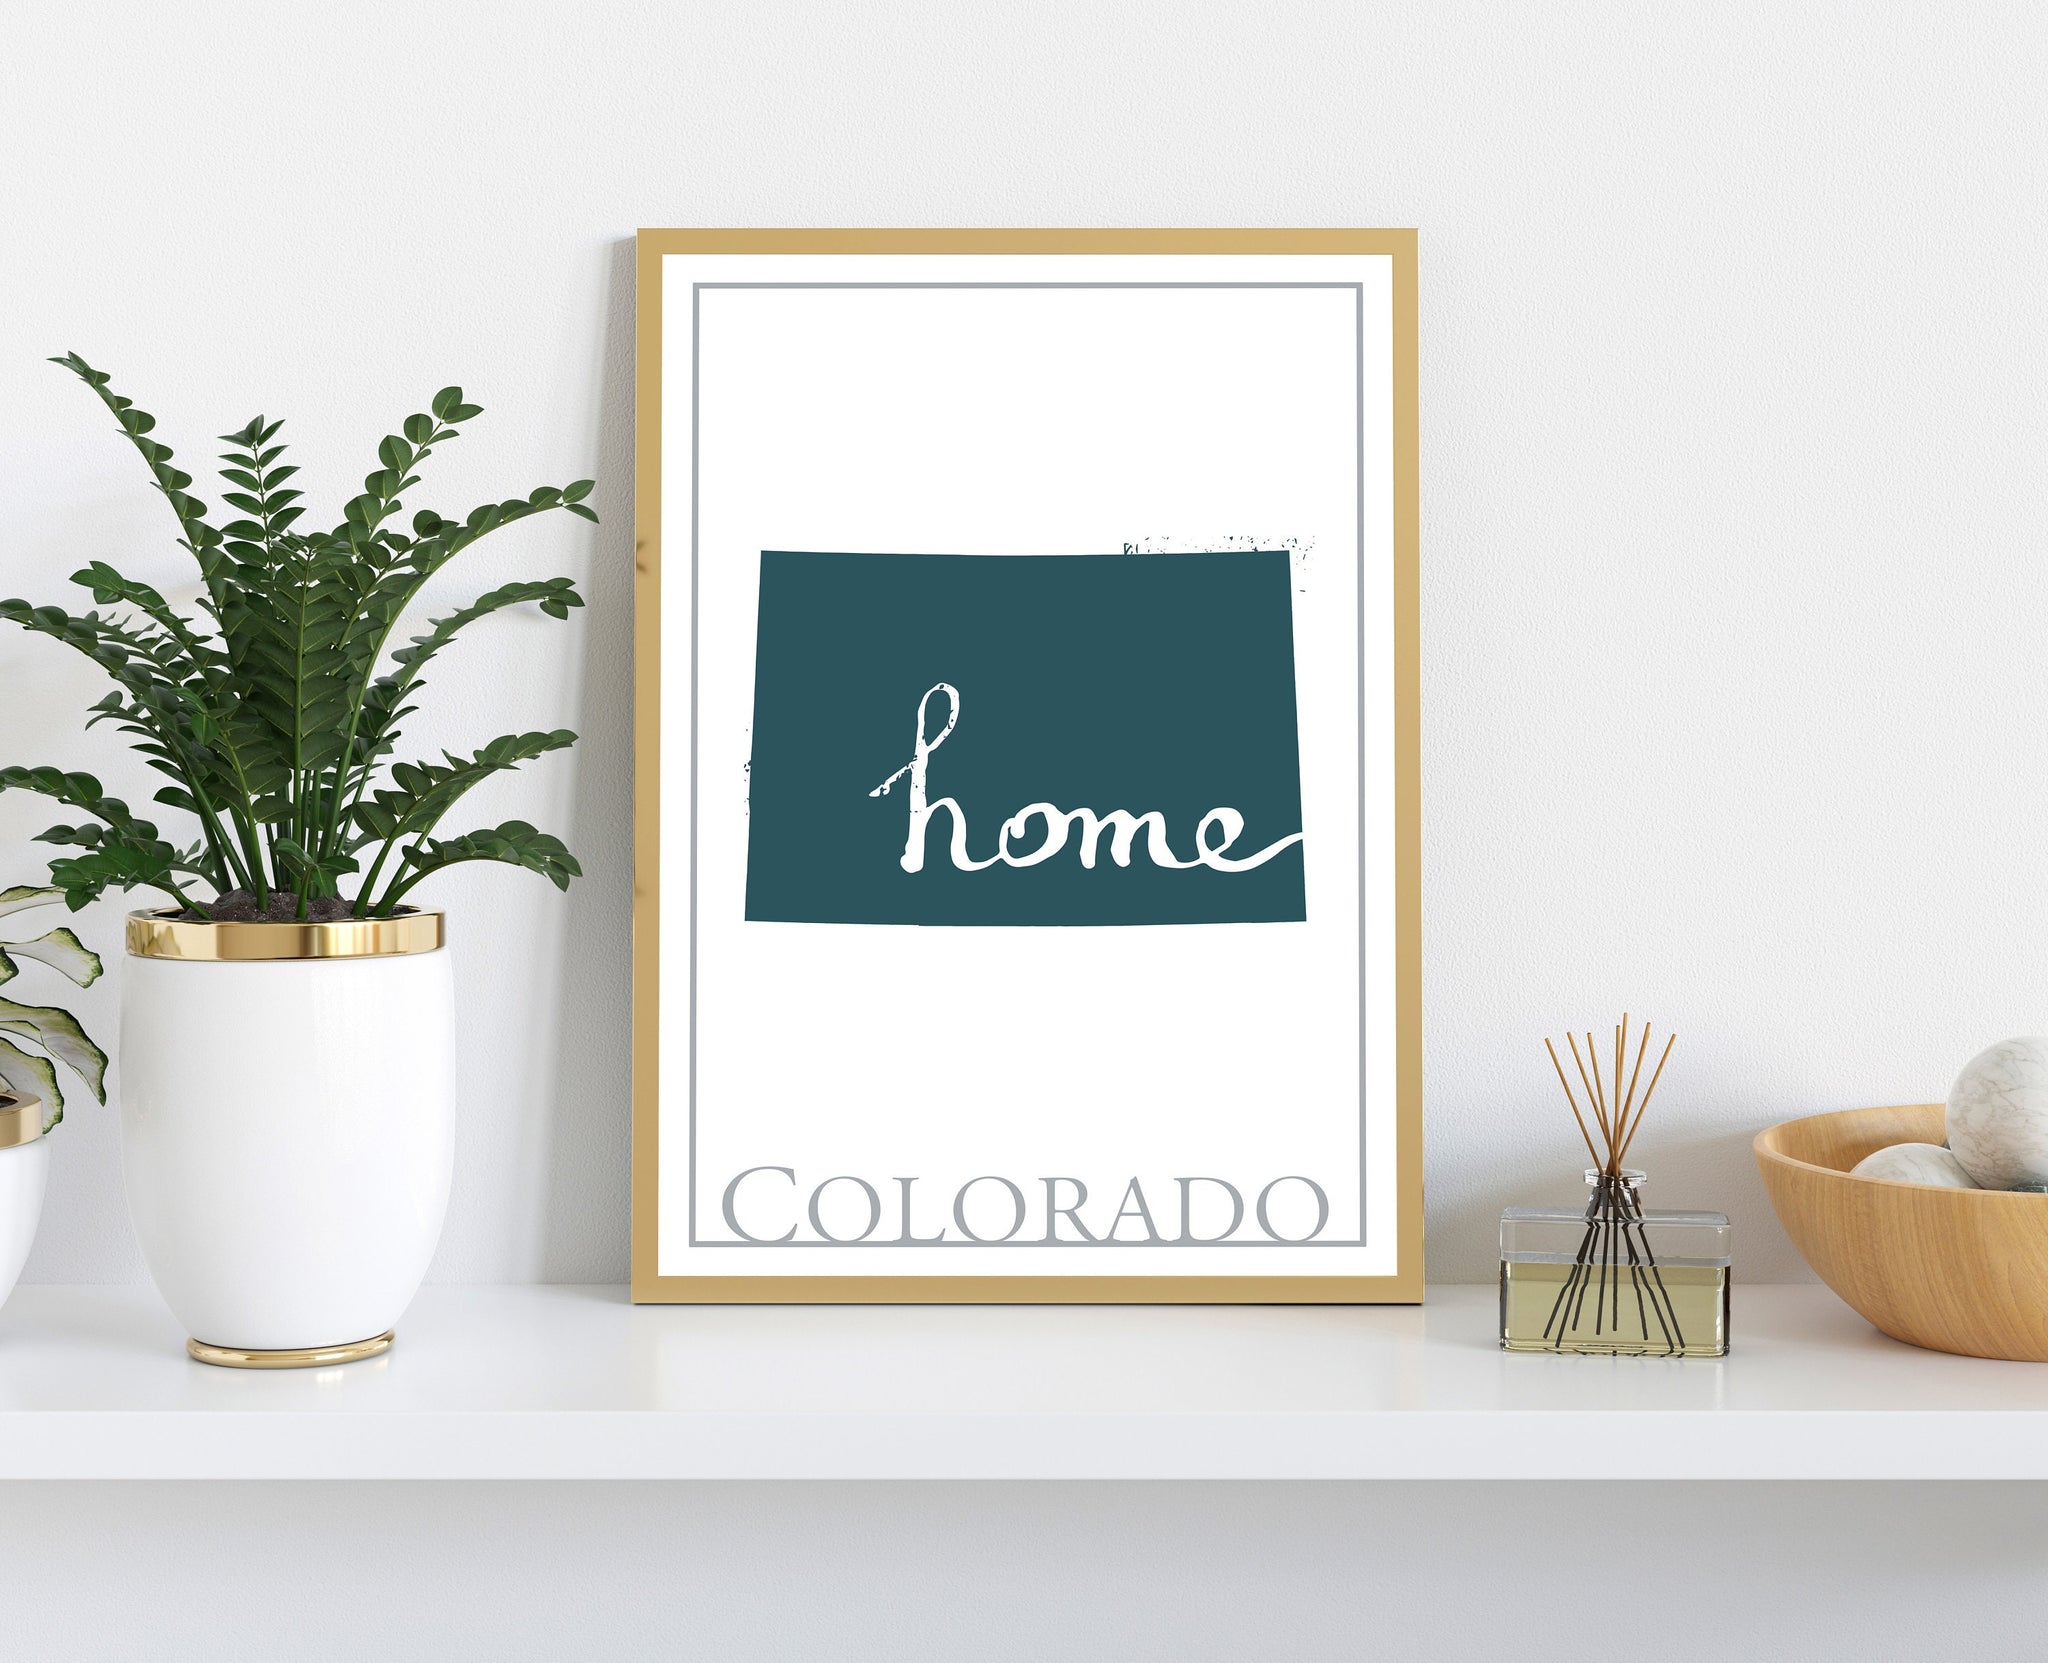 Colorado Map Wall Art, Colorado Modern Map Poster, Home Wall Decor, City Map, States map posters, Home wall decor, Office wall decor, Gifts